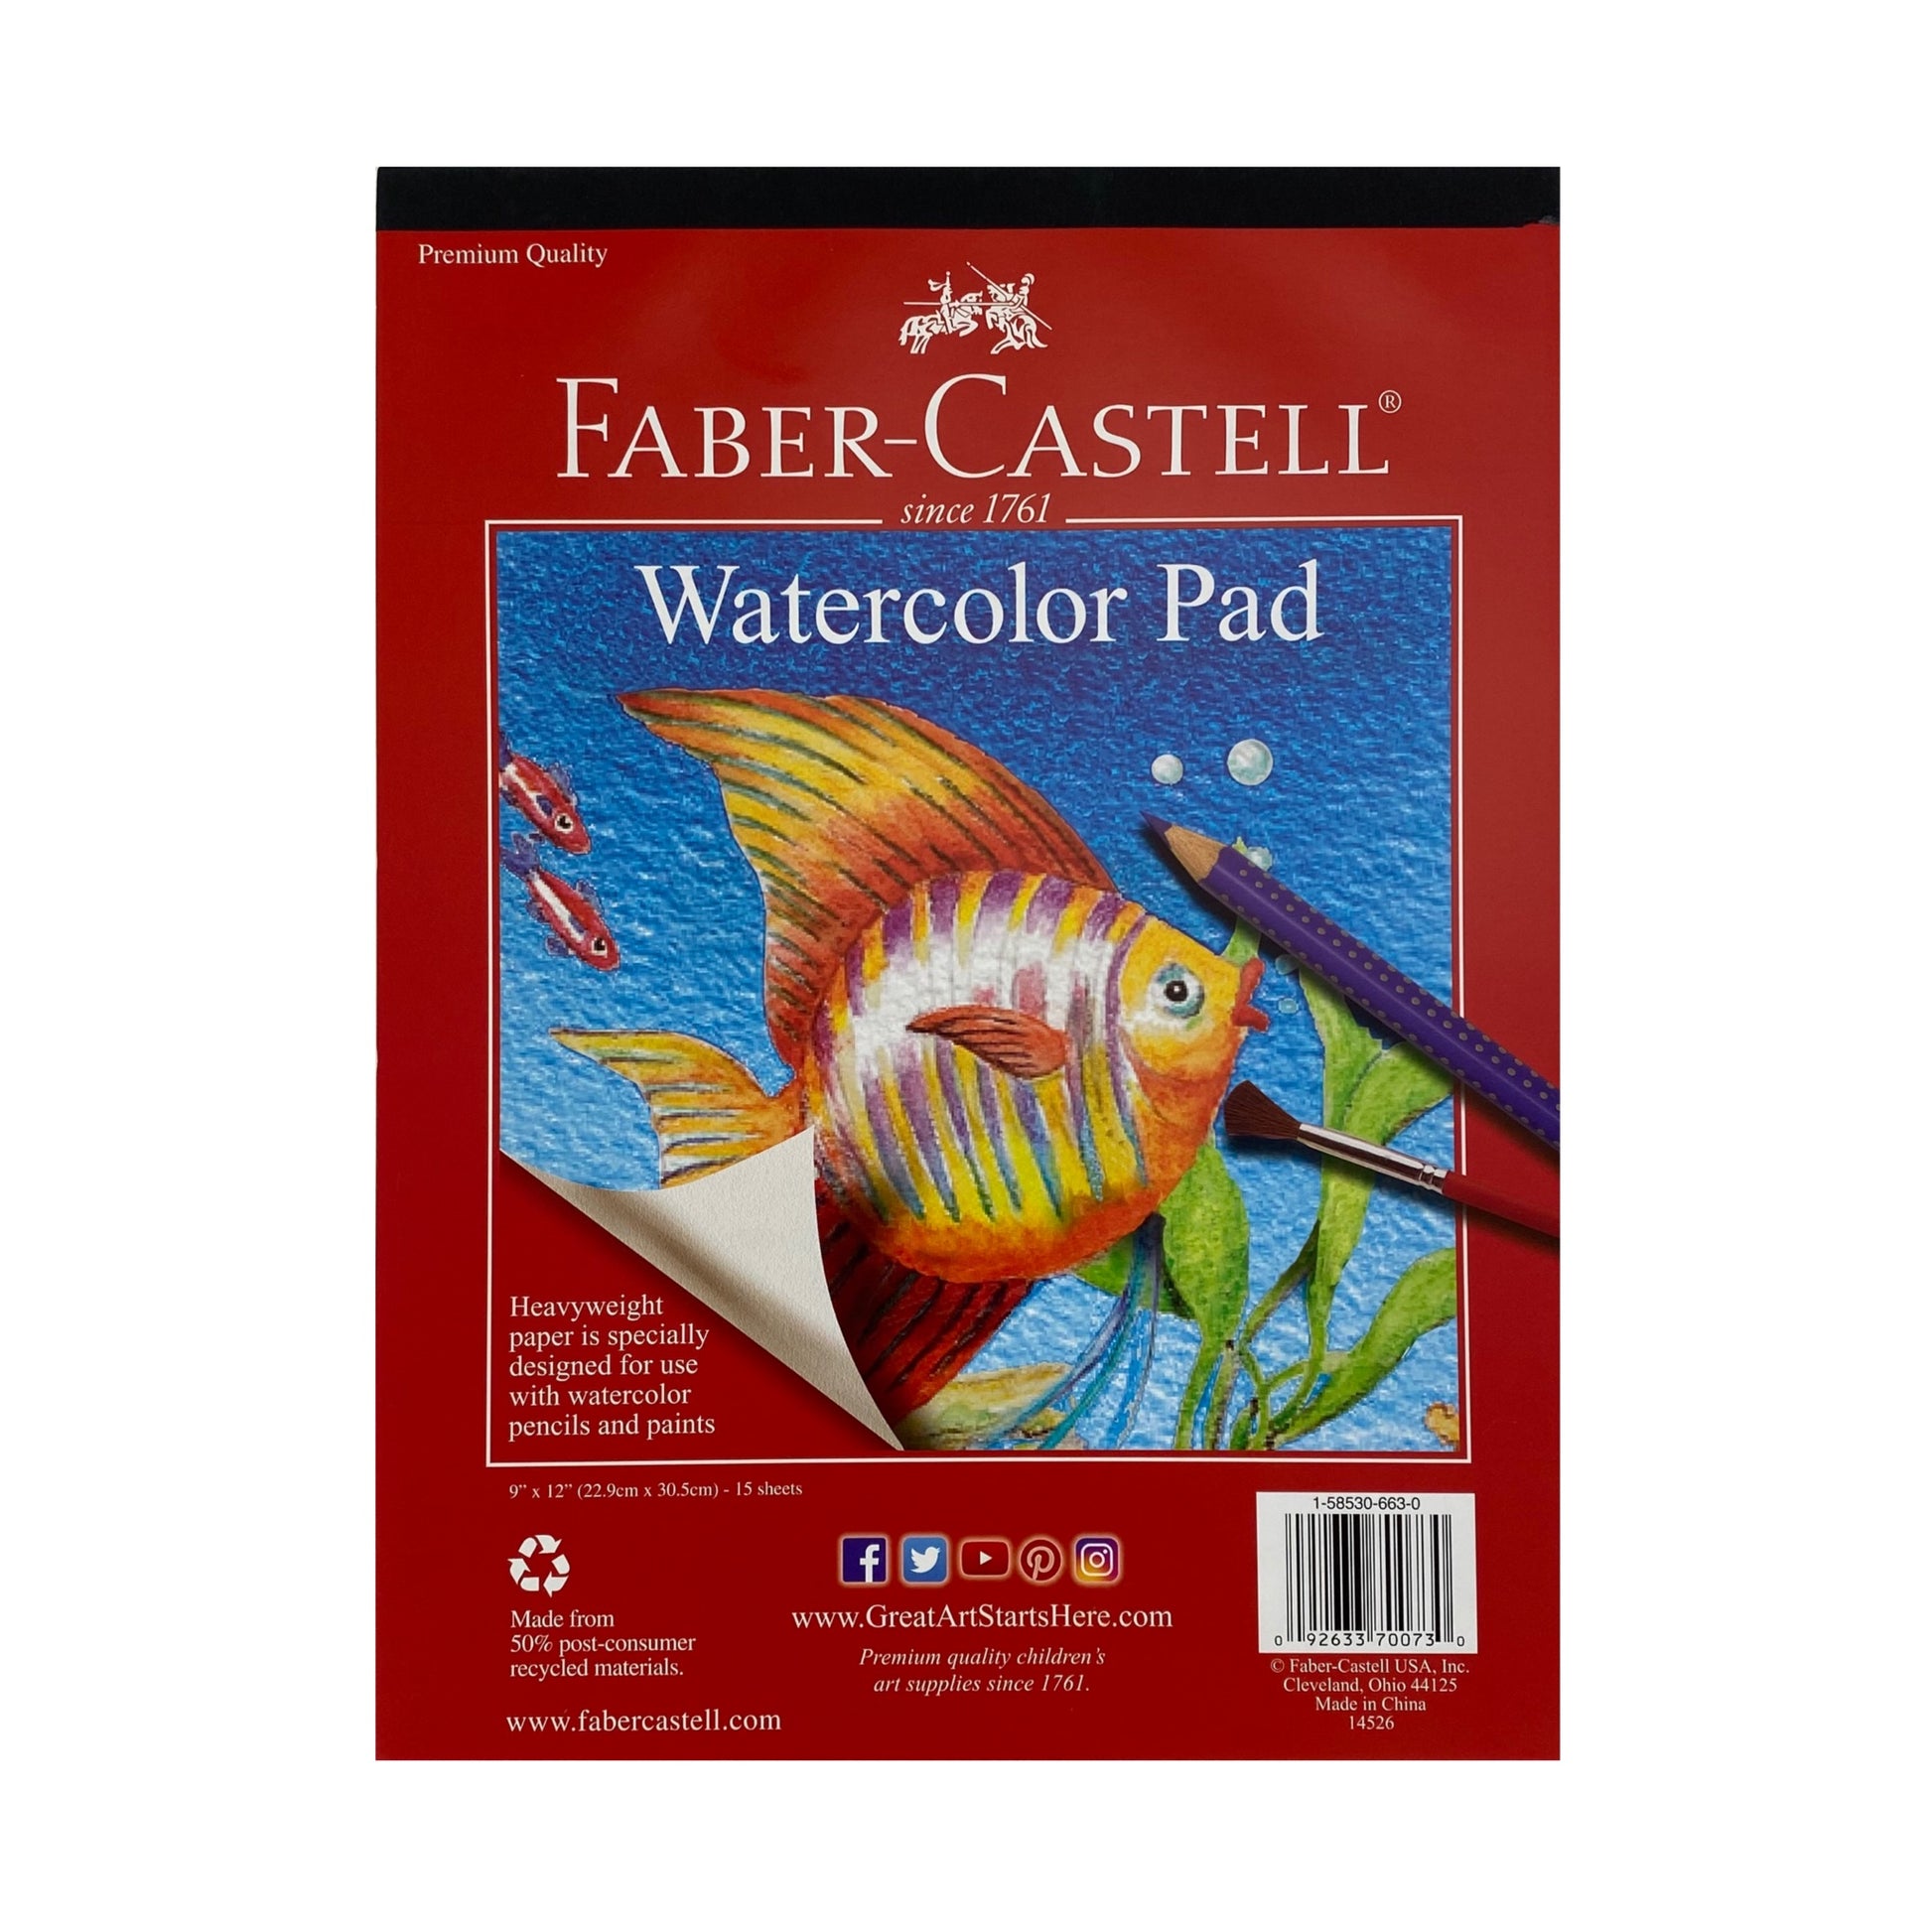 Faber-Castell Watercolor Pad - 9 x 12 inches - by Faber-Castell - K. A. Artist Shop